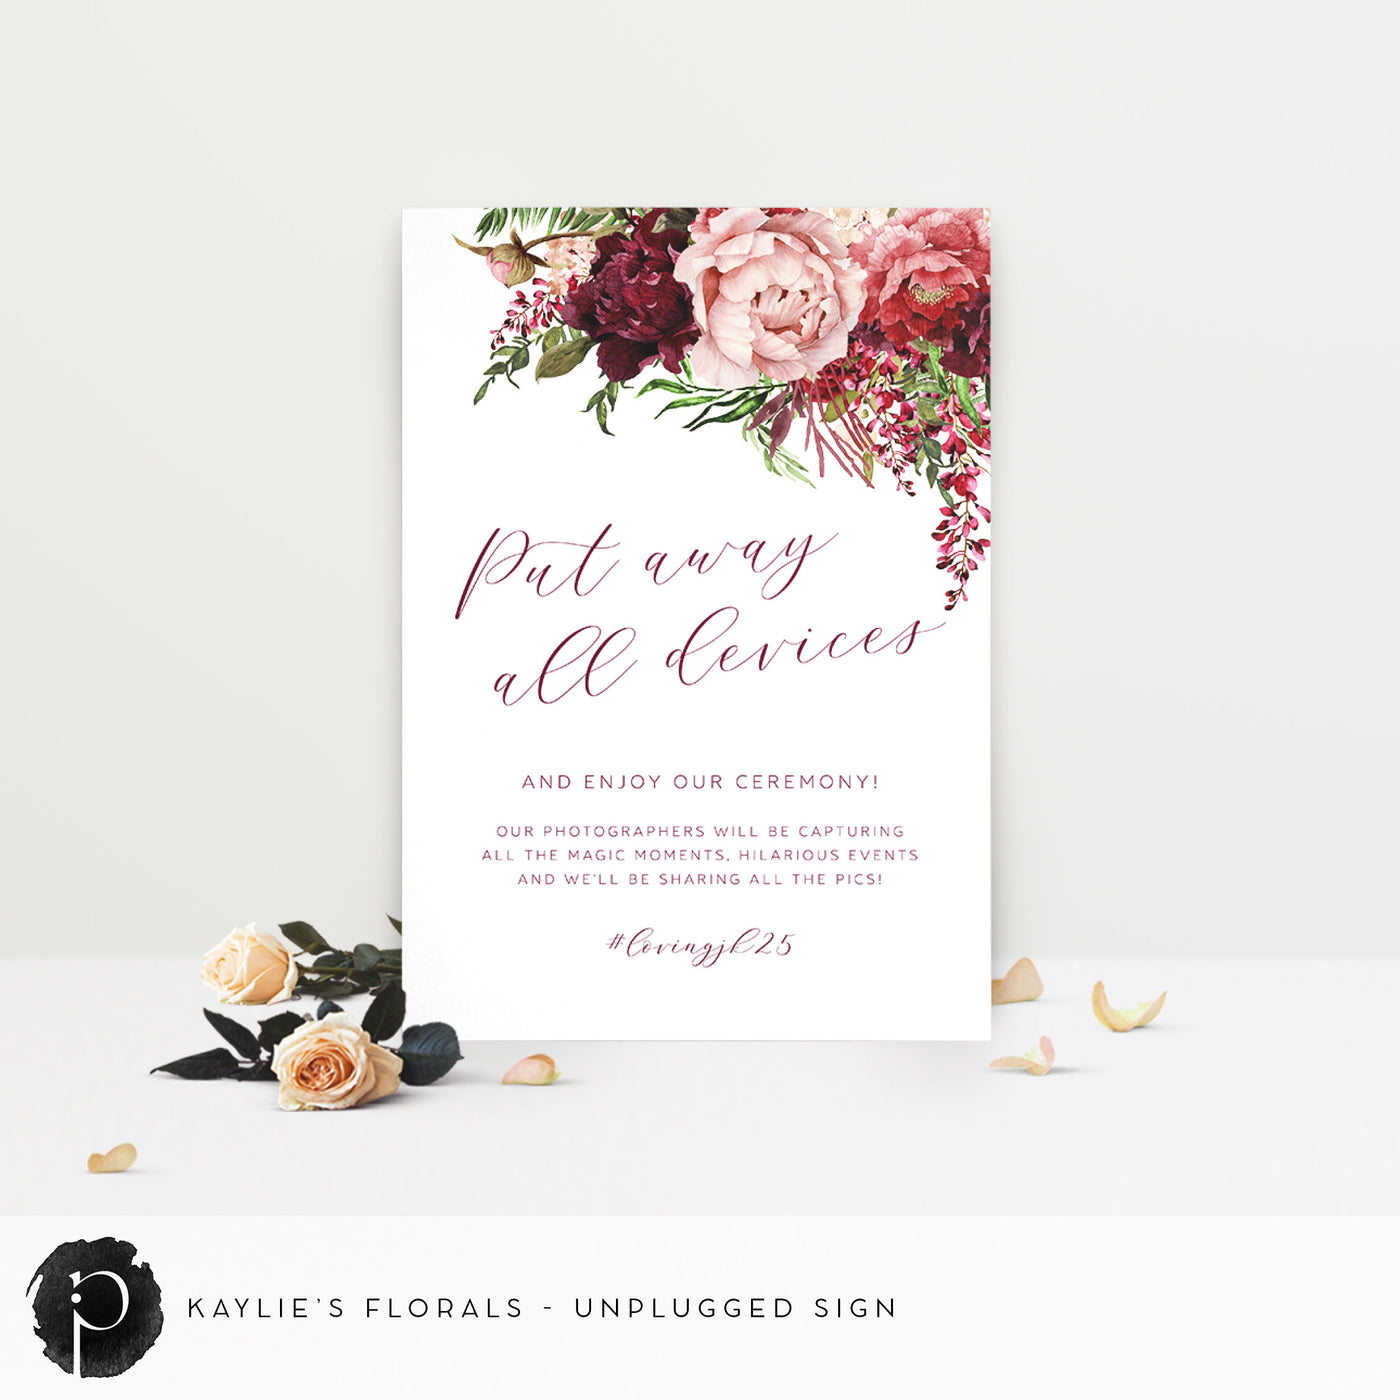 Kaylie's Florals - Unplugged Ceremony Sign